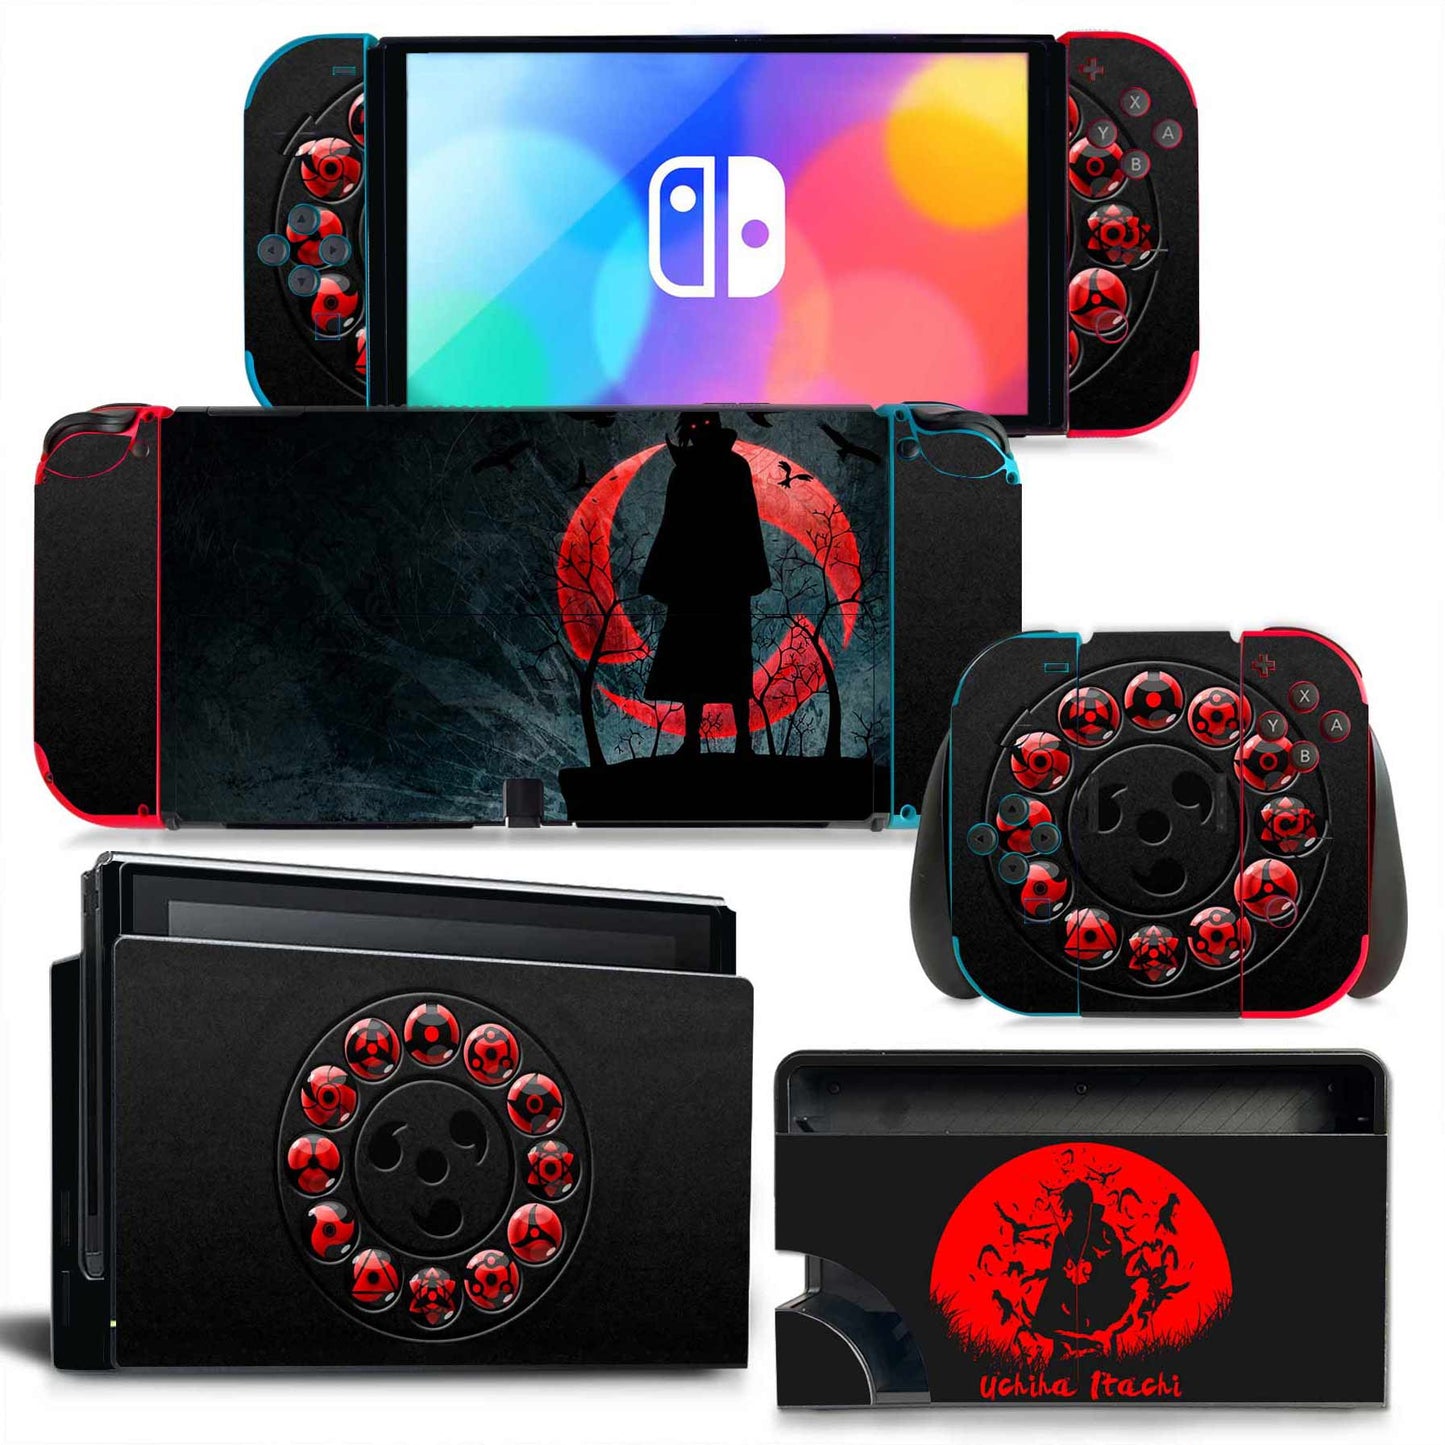 Anime Nintendo Switch Sticker Protective Cover